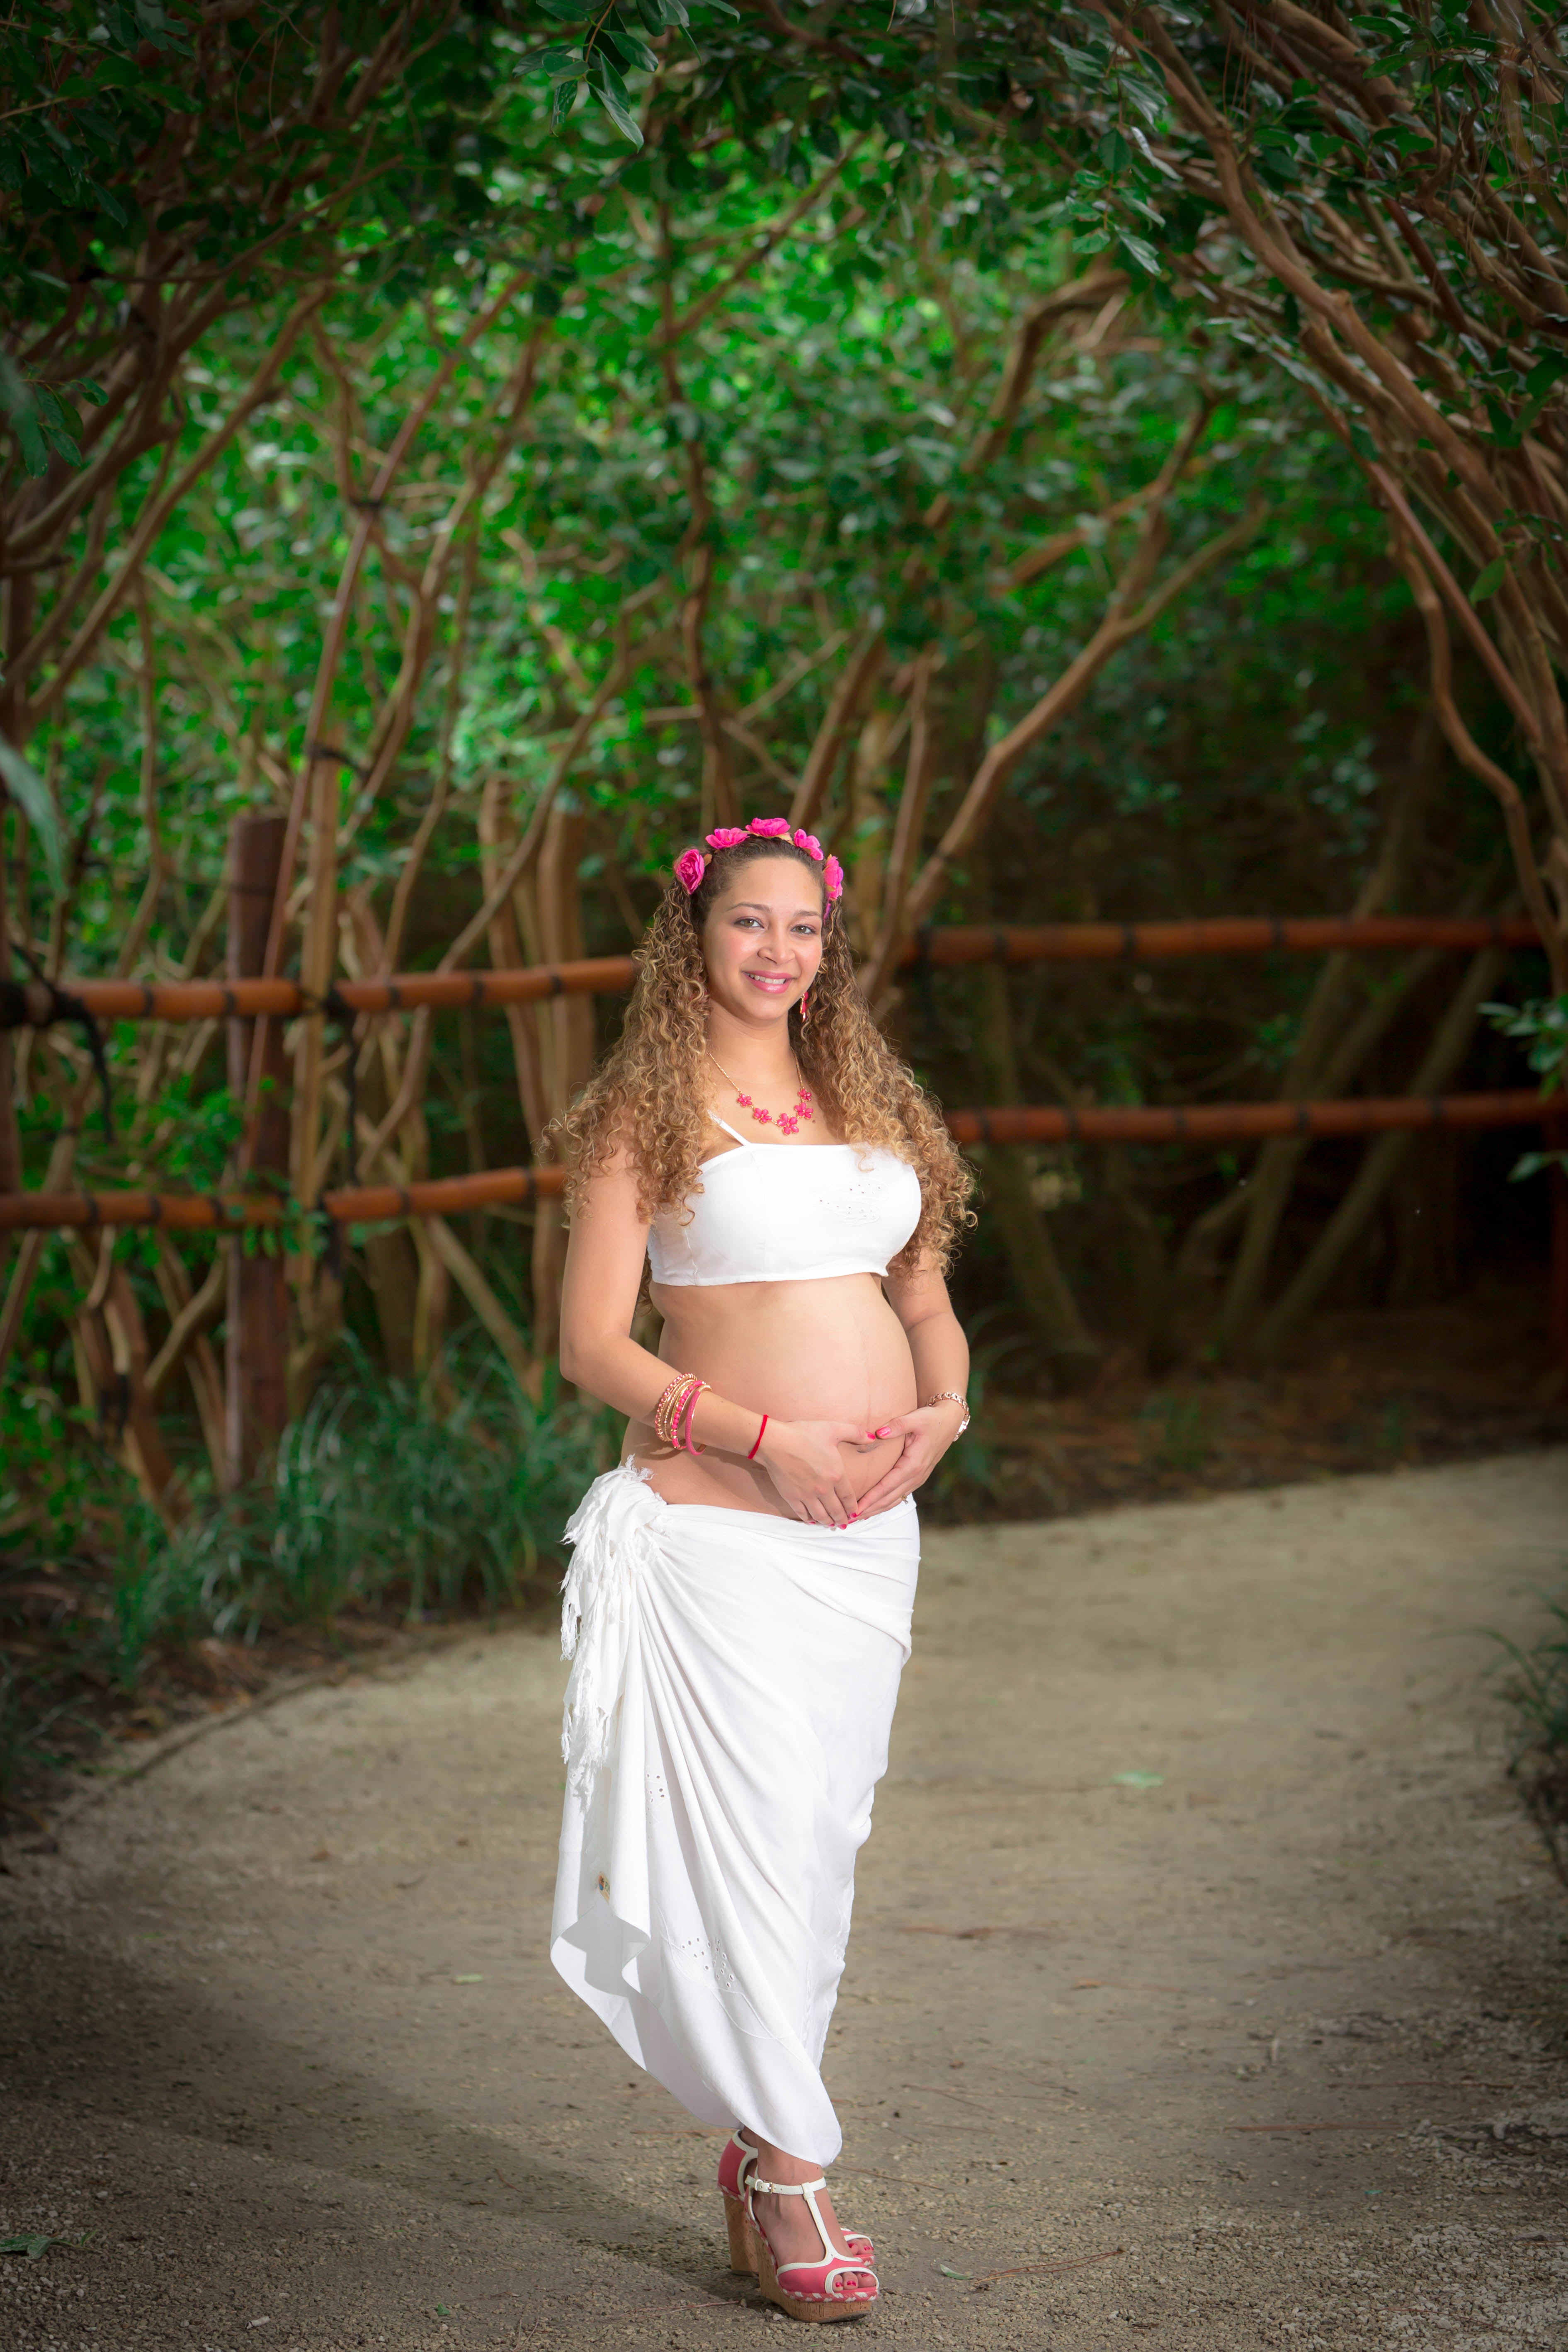 Best Professional Coral Springs Photographer Maternity portrait imageAlfredo Valentine Couture Bridal Photography Maternity Session at Morikami Japanese Gardens in Delray Beach, Florida